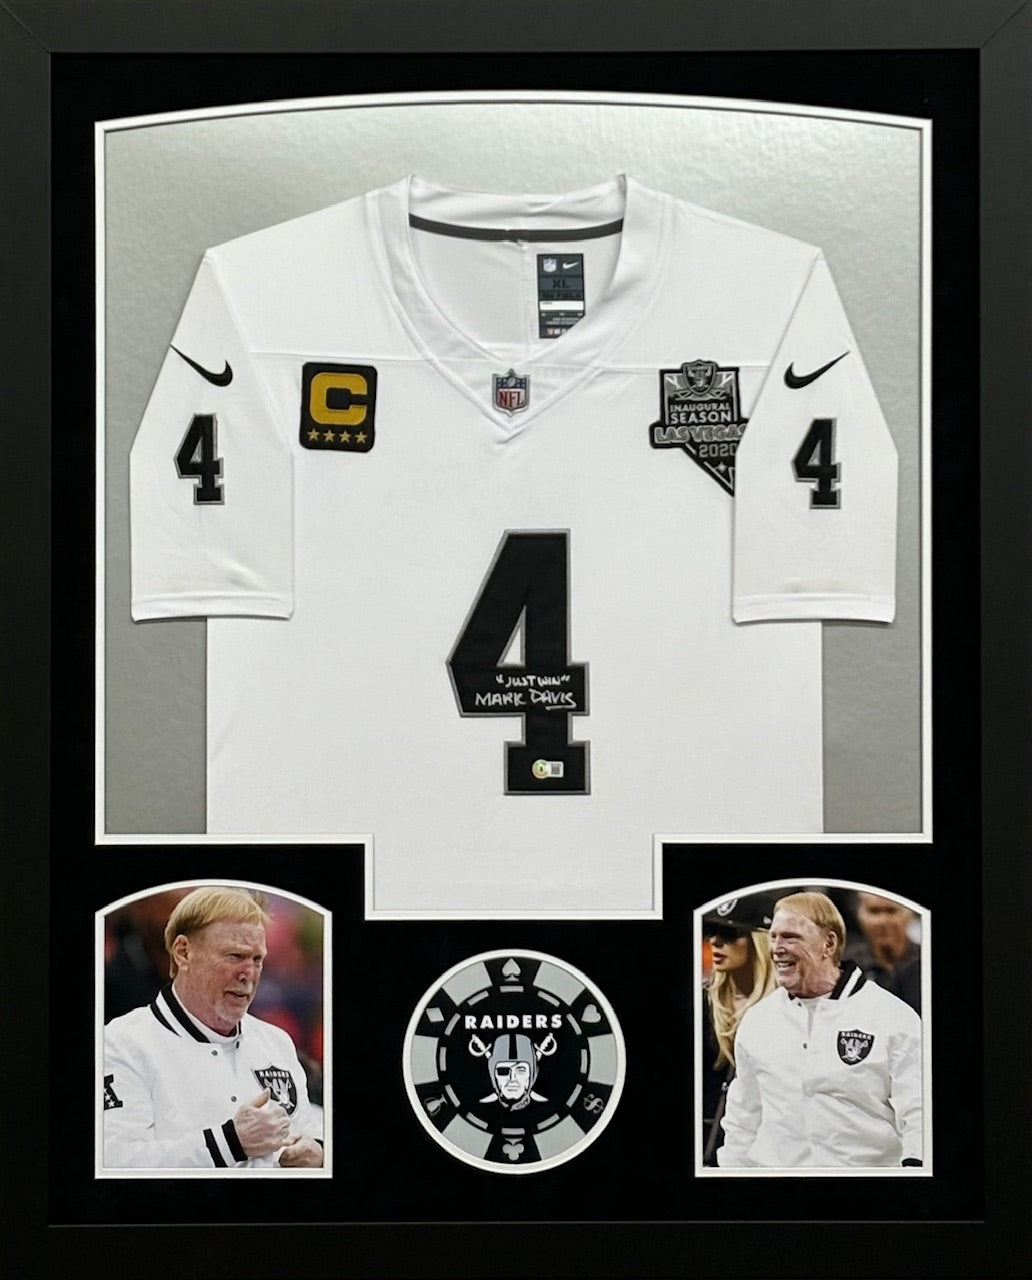 Las Vegas Raiders Owner Mark Davis Signed White Jersey with 